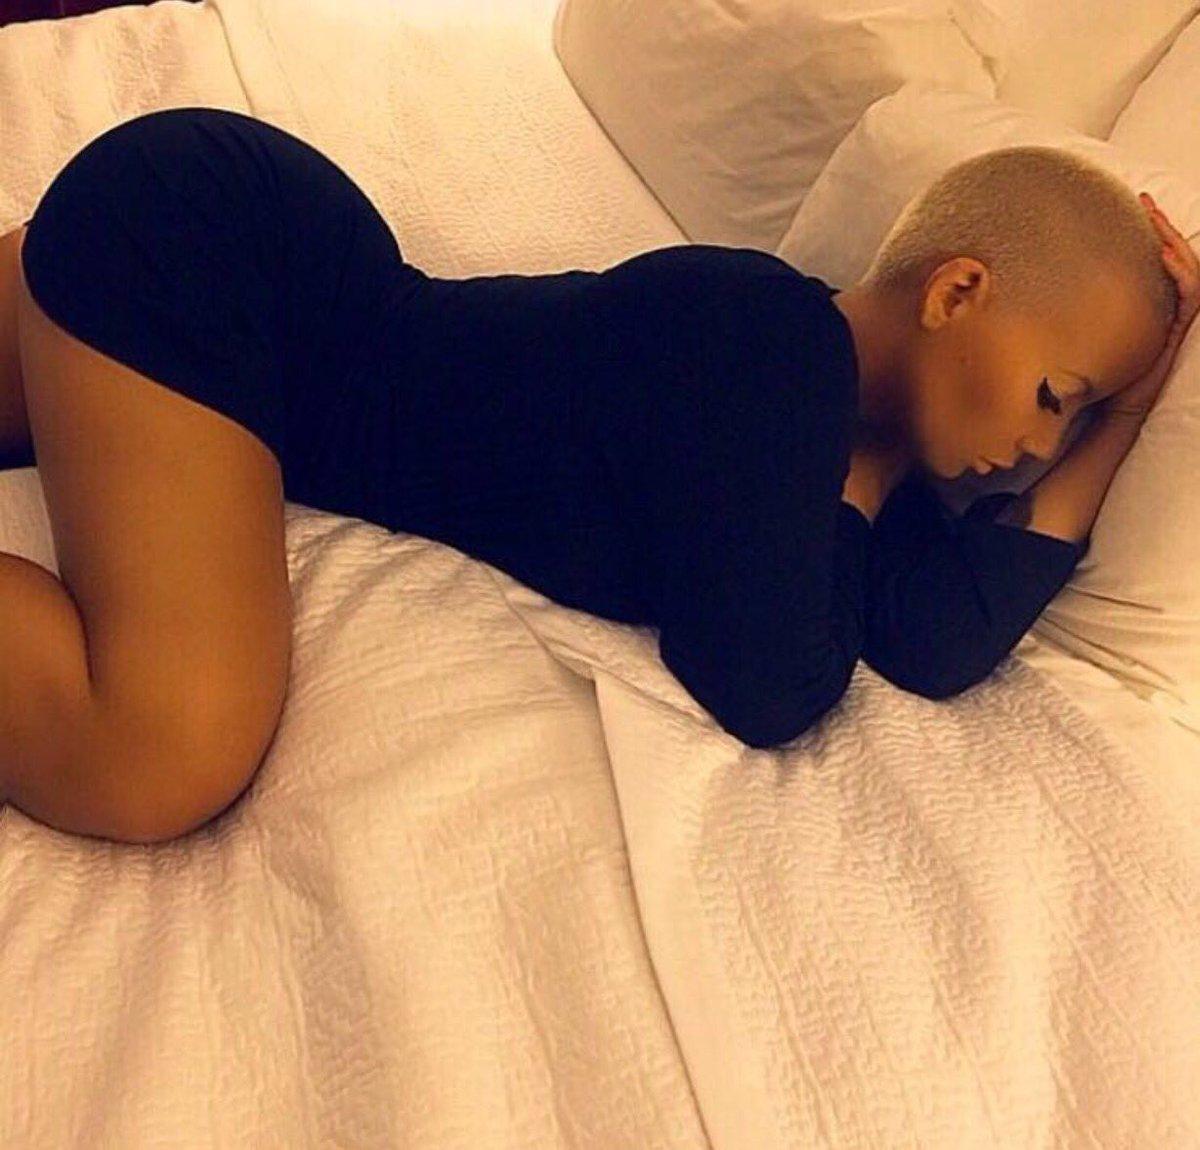 61 Hottest Amber Rose Big Butt Pictures Will Get Your Blood Pumping | Best Of Comic Books